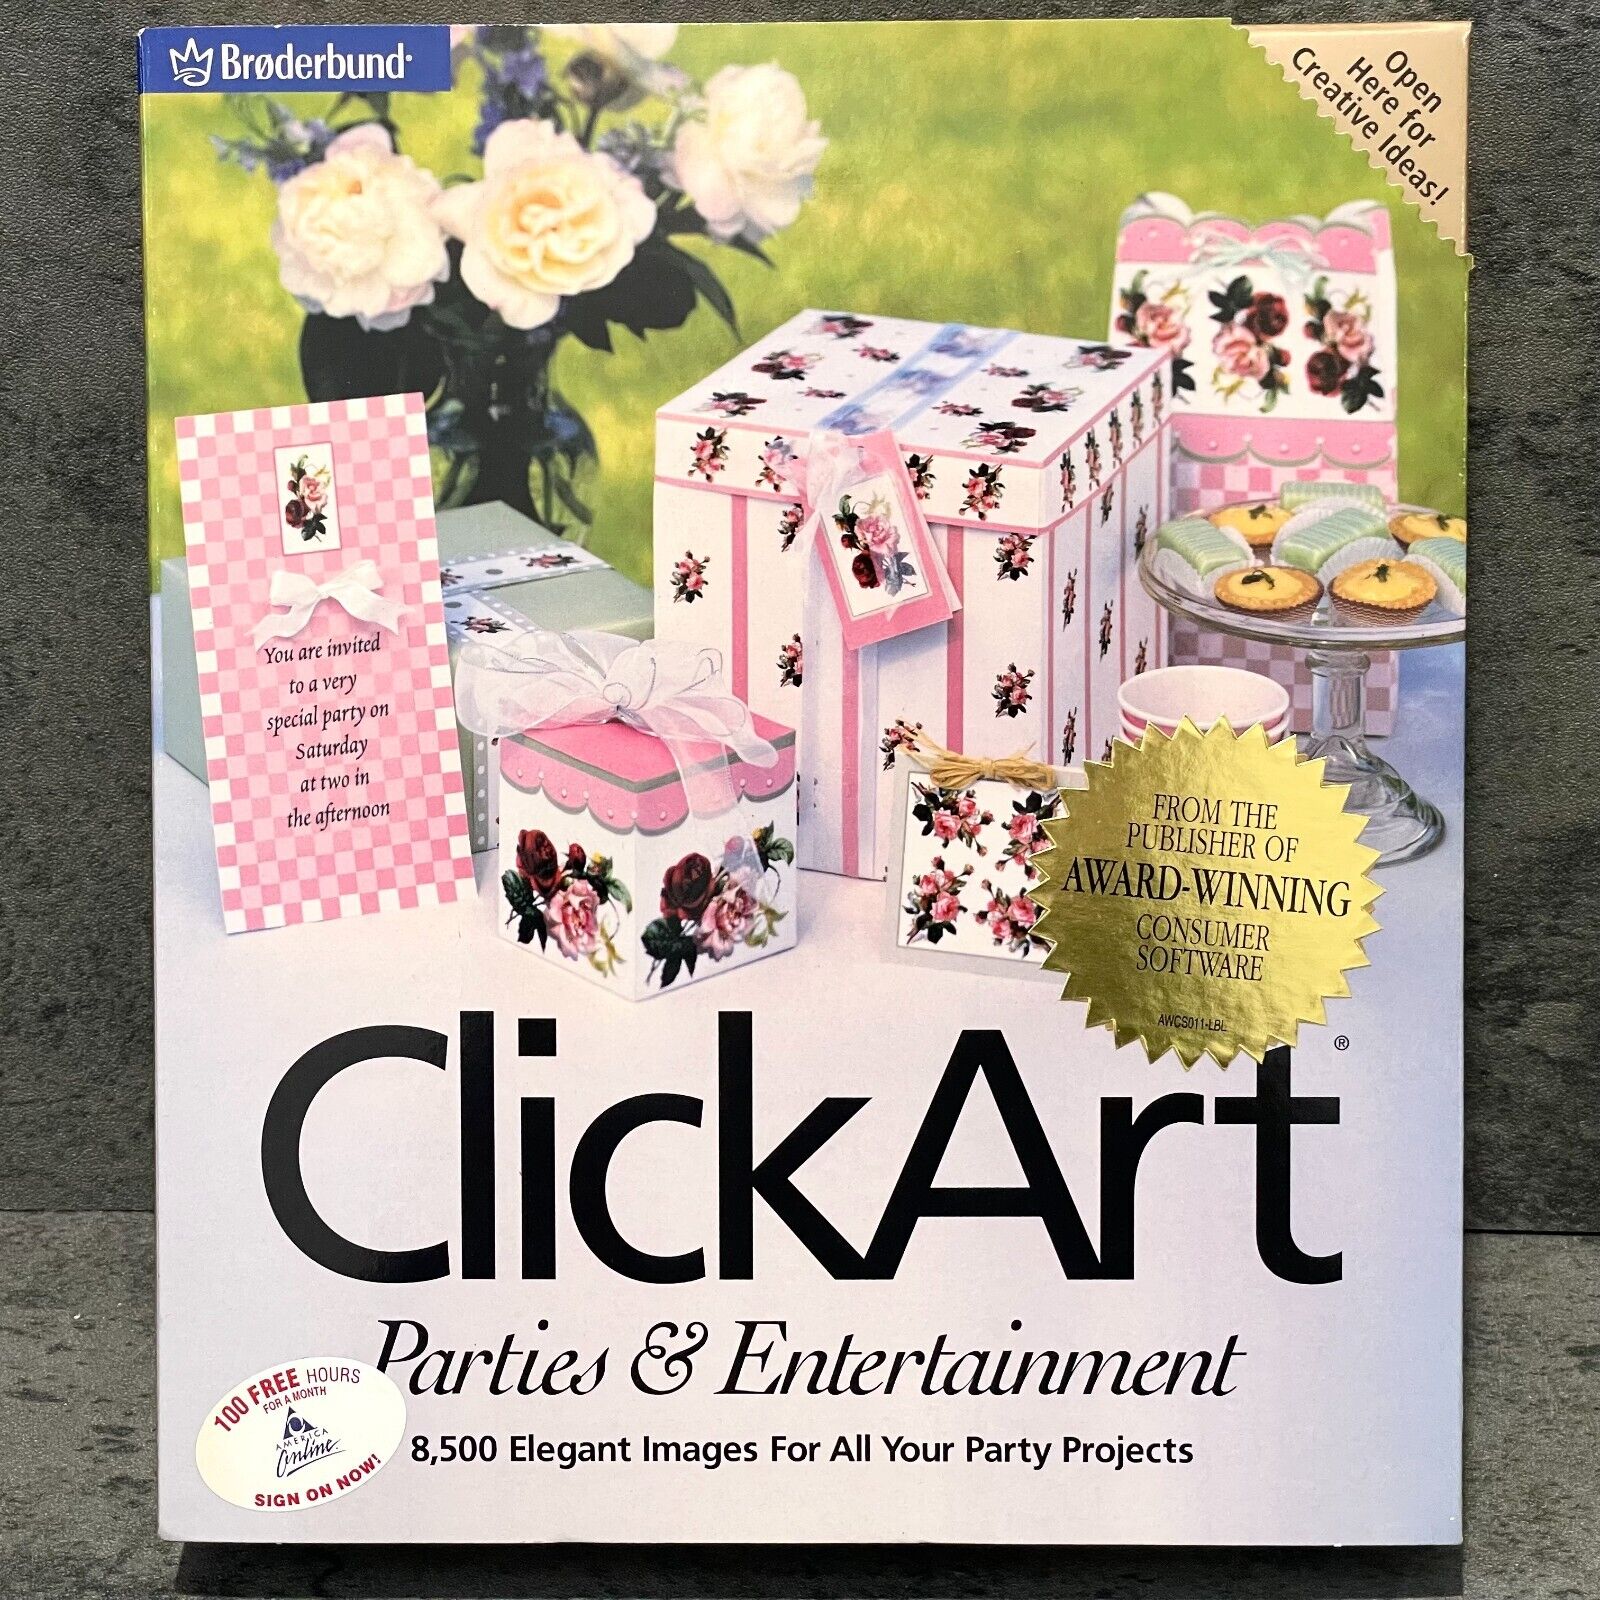 New Sealed Clickart Parties & Entertainment by Broderbund PC CD ROM Vintage